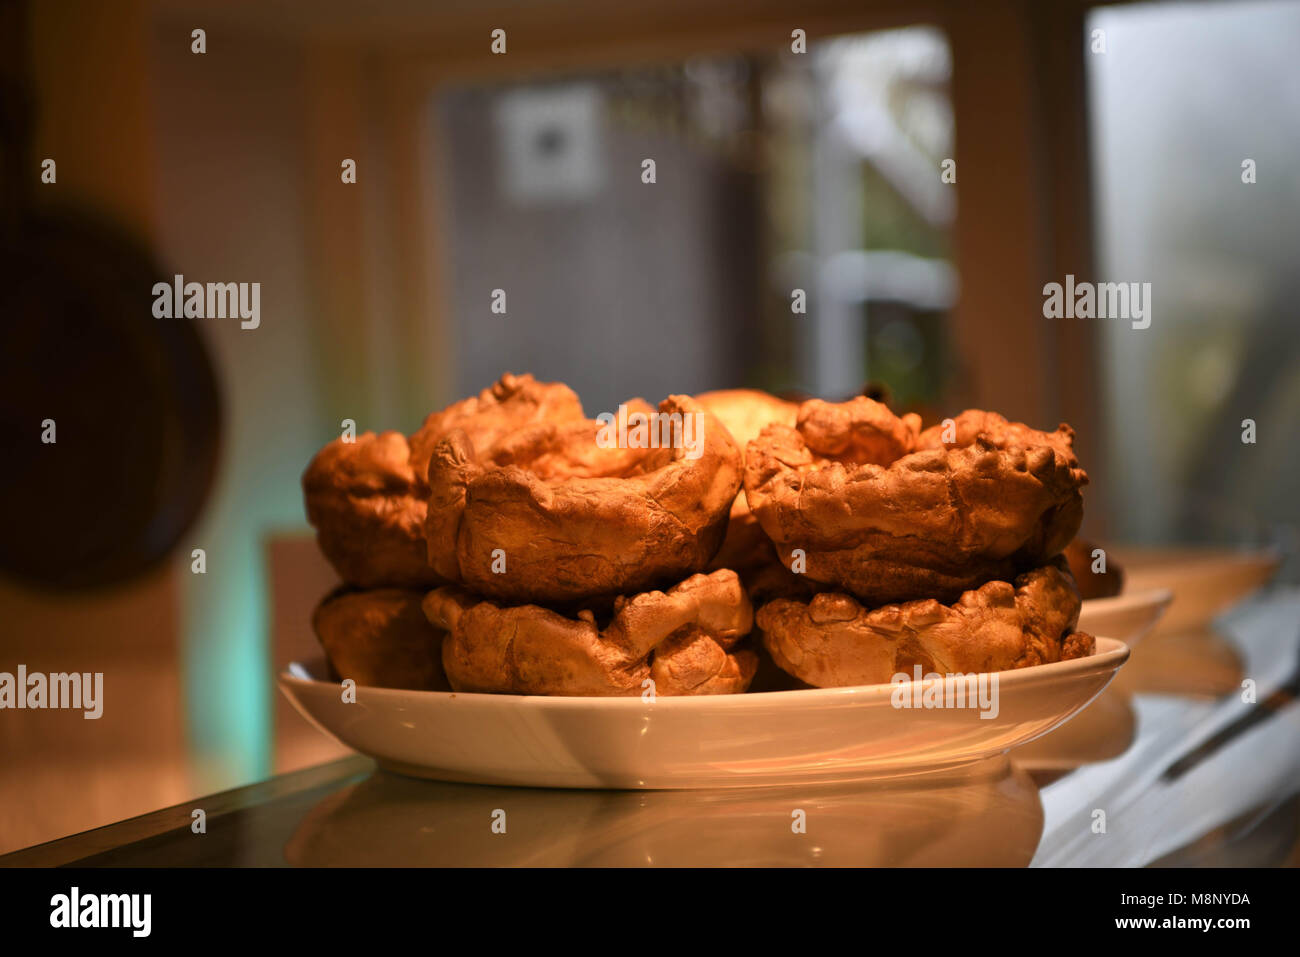 food of cooked golden Yorkshire puddings in a bowl Stock Photo